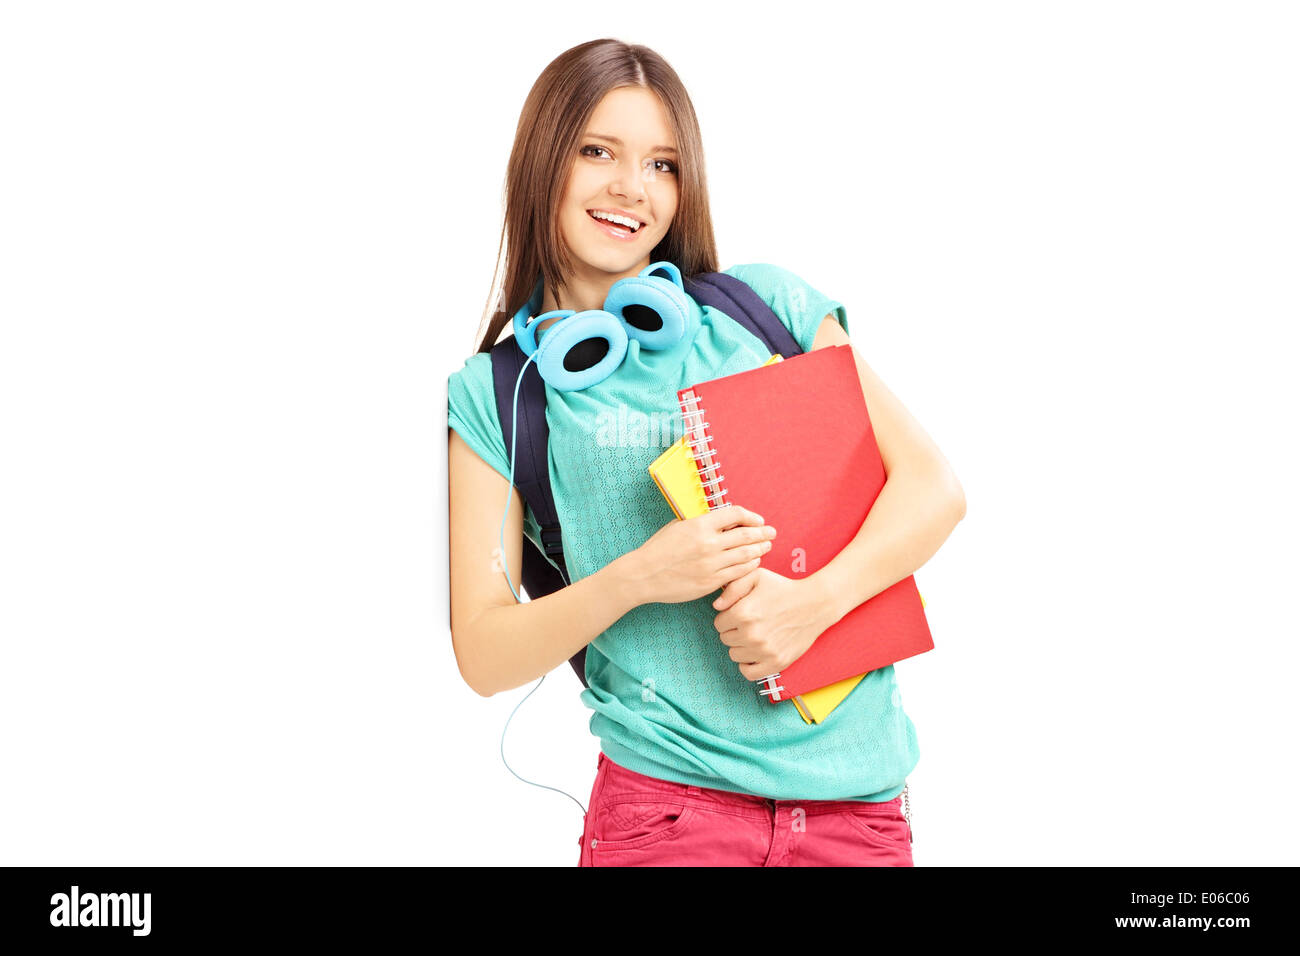 Smiling female with schoolbag and headphones looking at camera and leaning against a wall Stock Photo